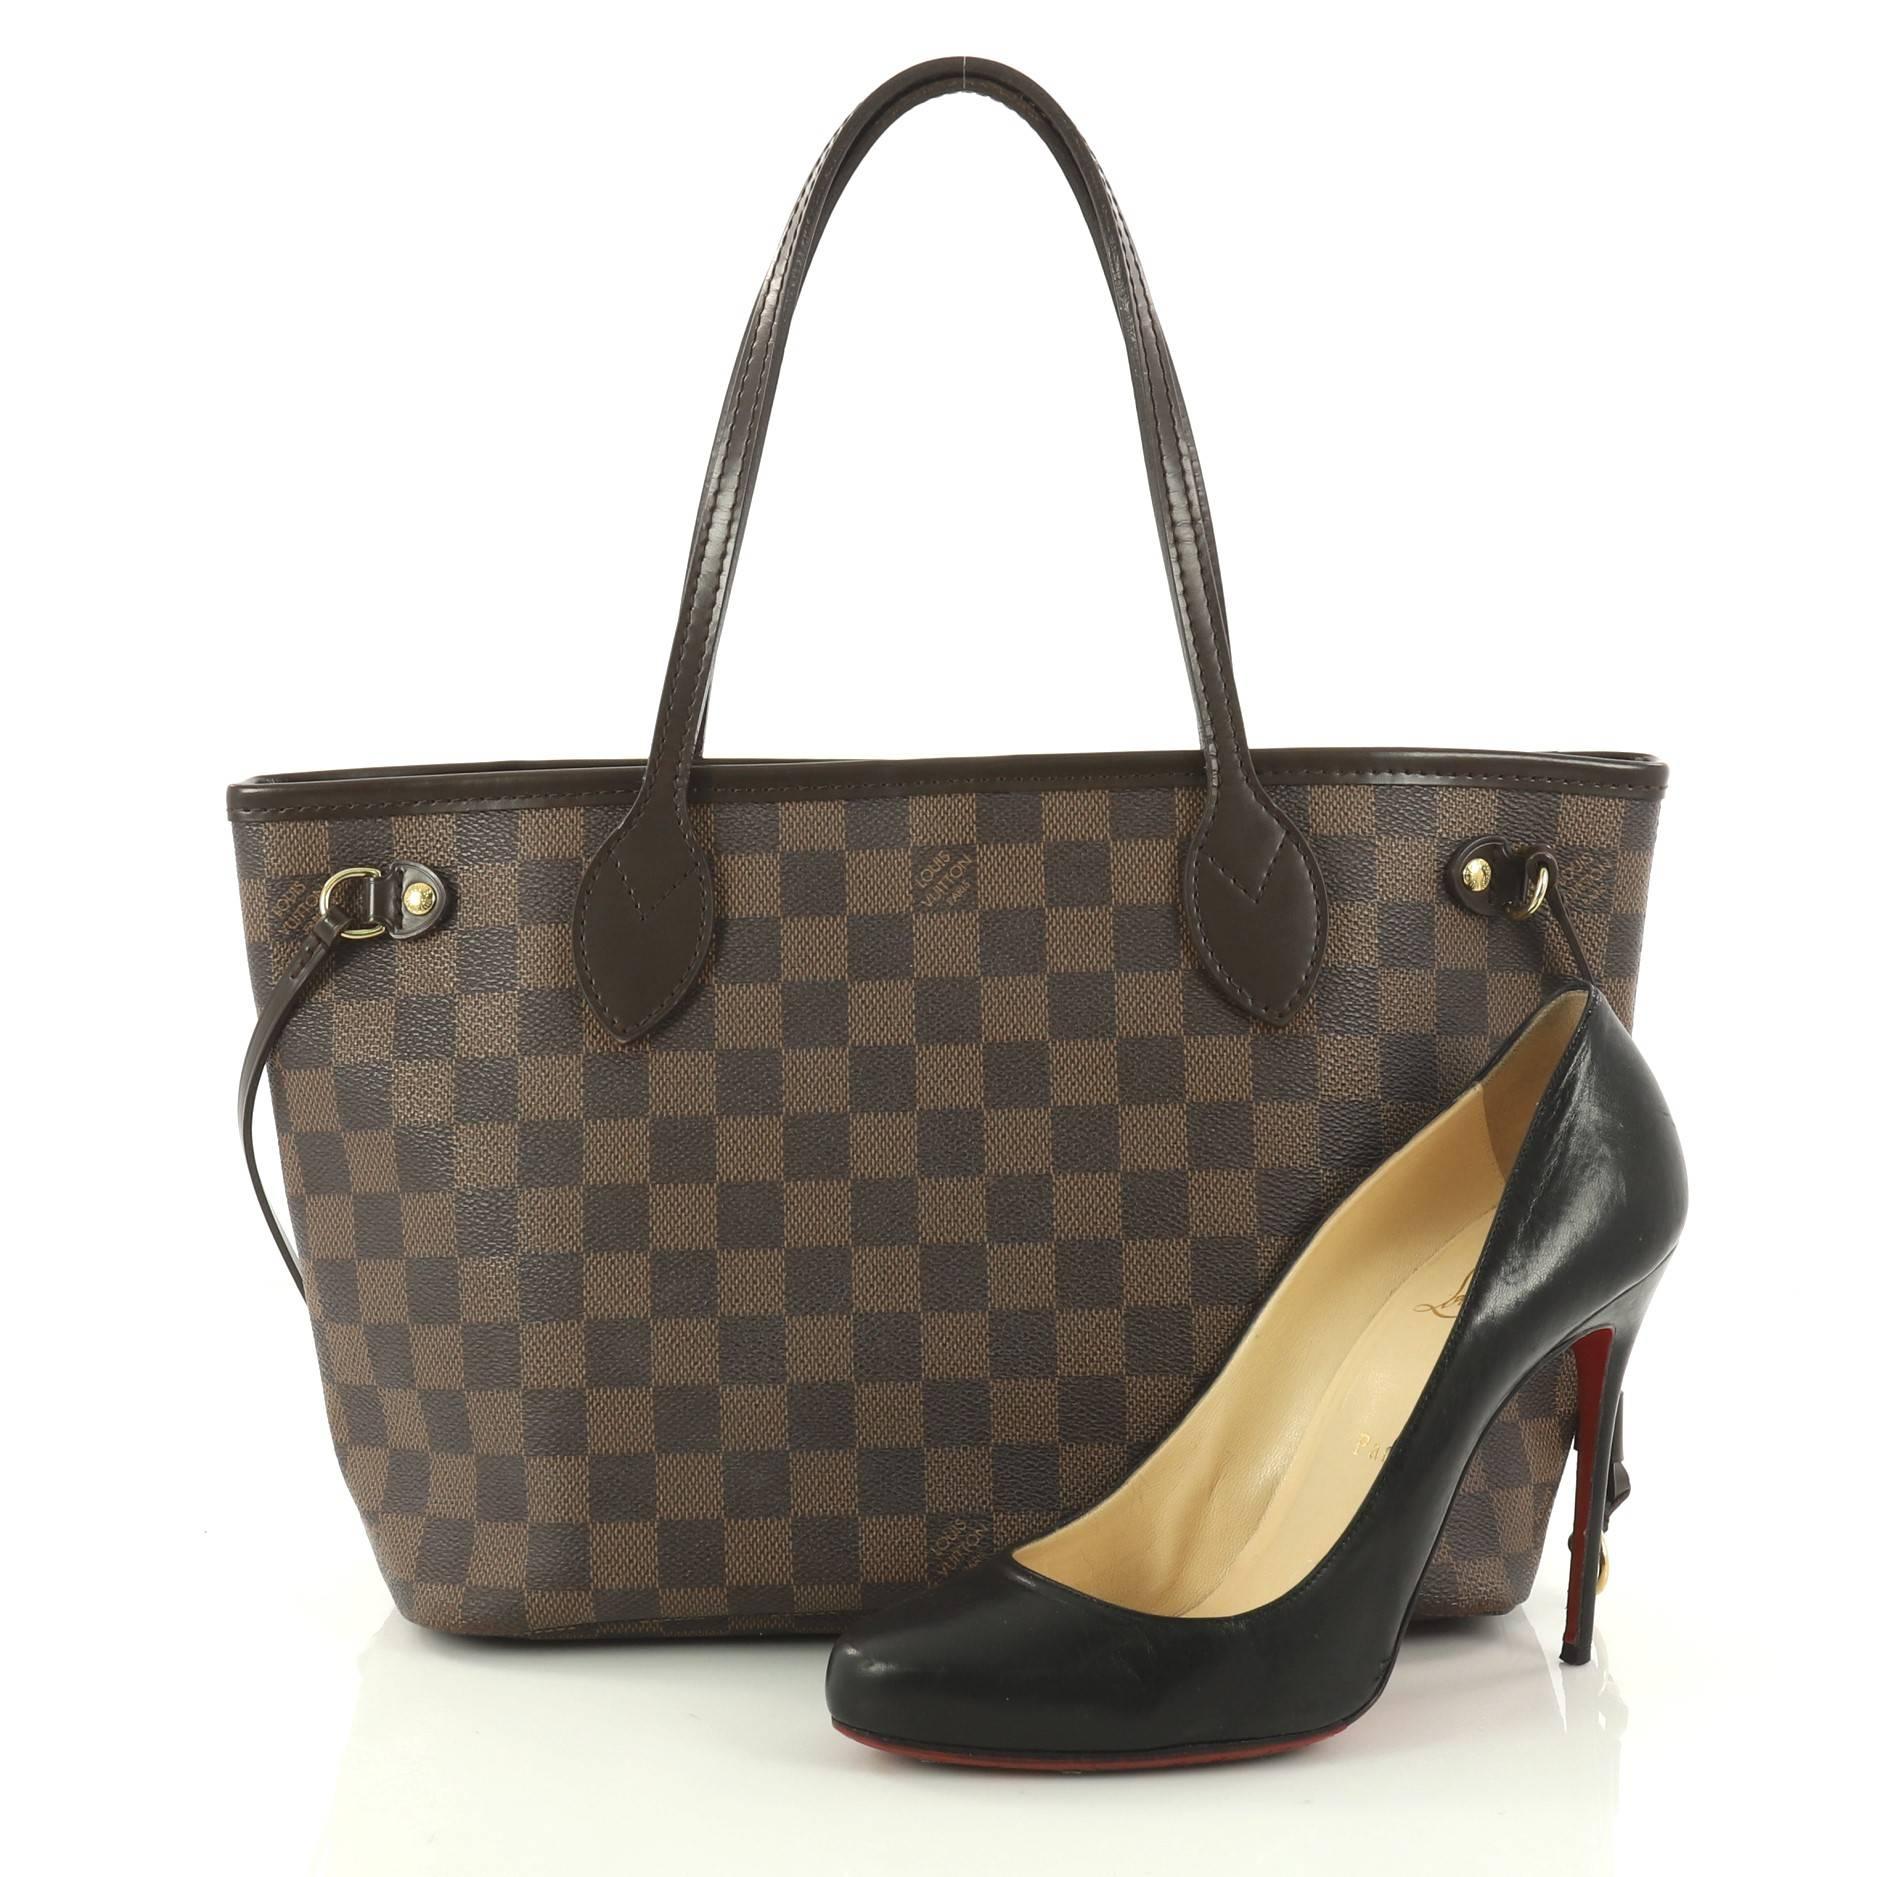 This authentic Louis Vuitton Neverfull Tote Damier PM is a popular and practical tote beloved by many. Constructed with Louis Vuitton's signature damier ebene coated canvas, this tote is spacious and structured without being bulky. The side laces